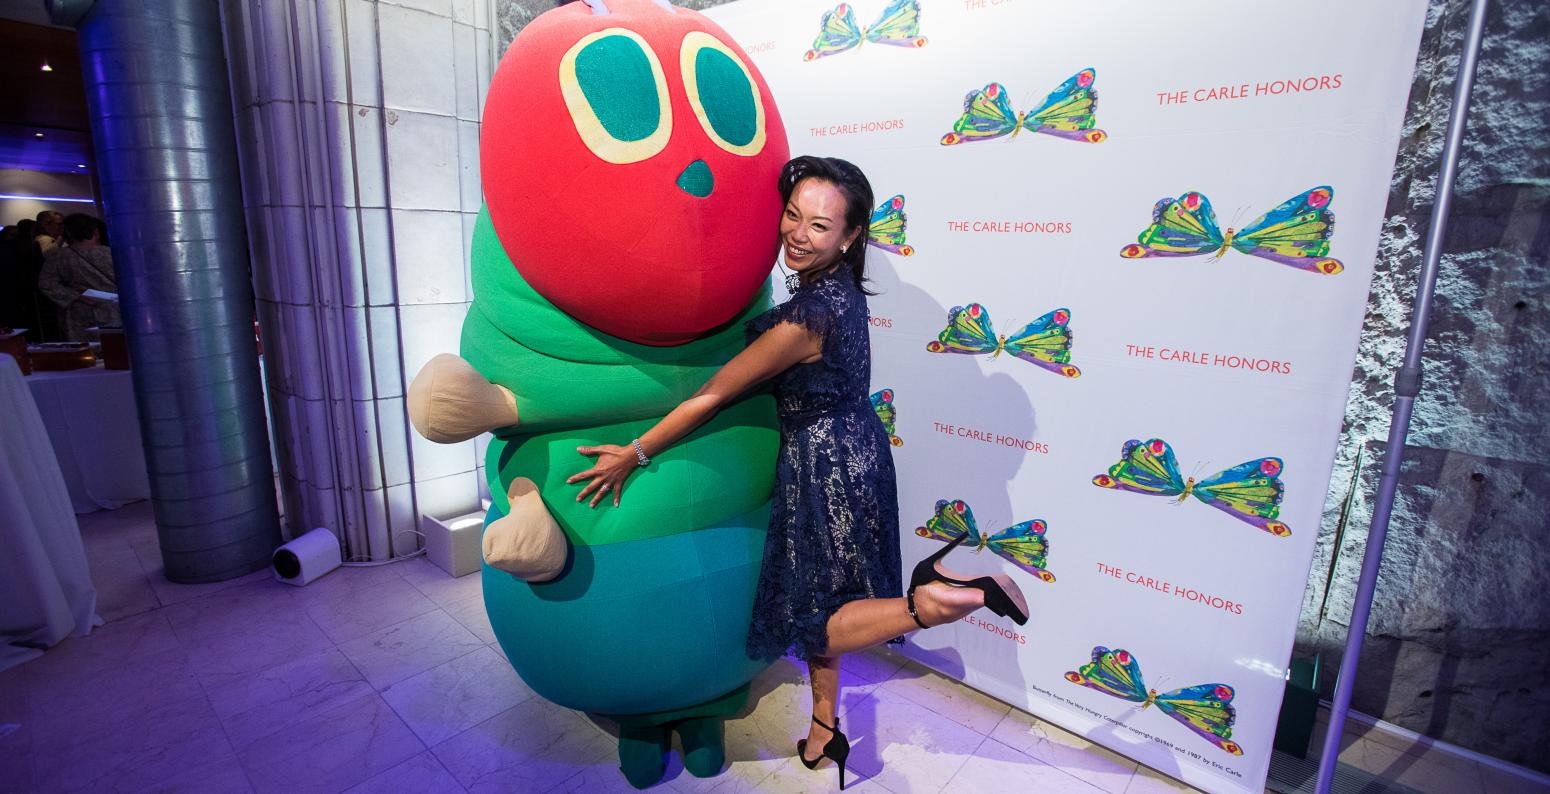 Carle Honors guest hugging the costumed Very Hungry Caterpillar 